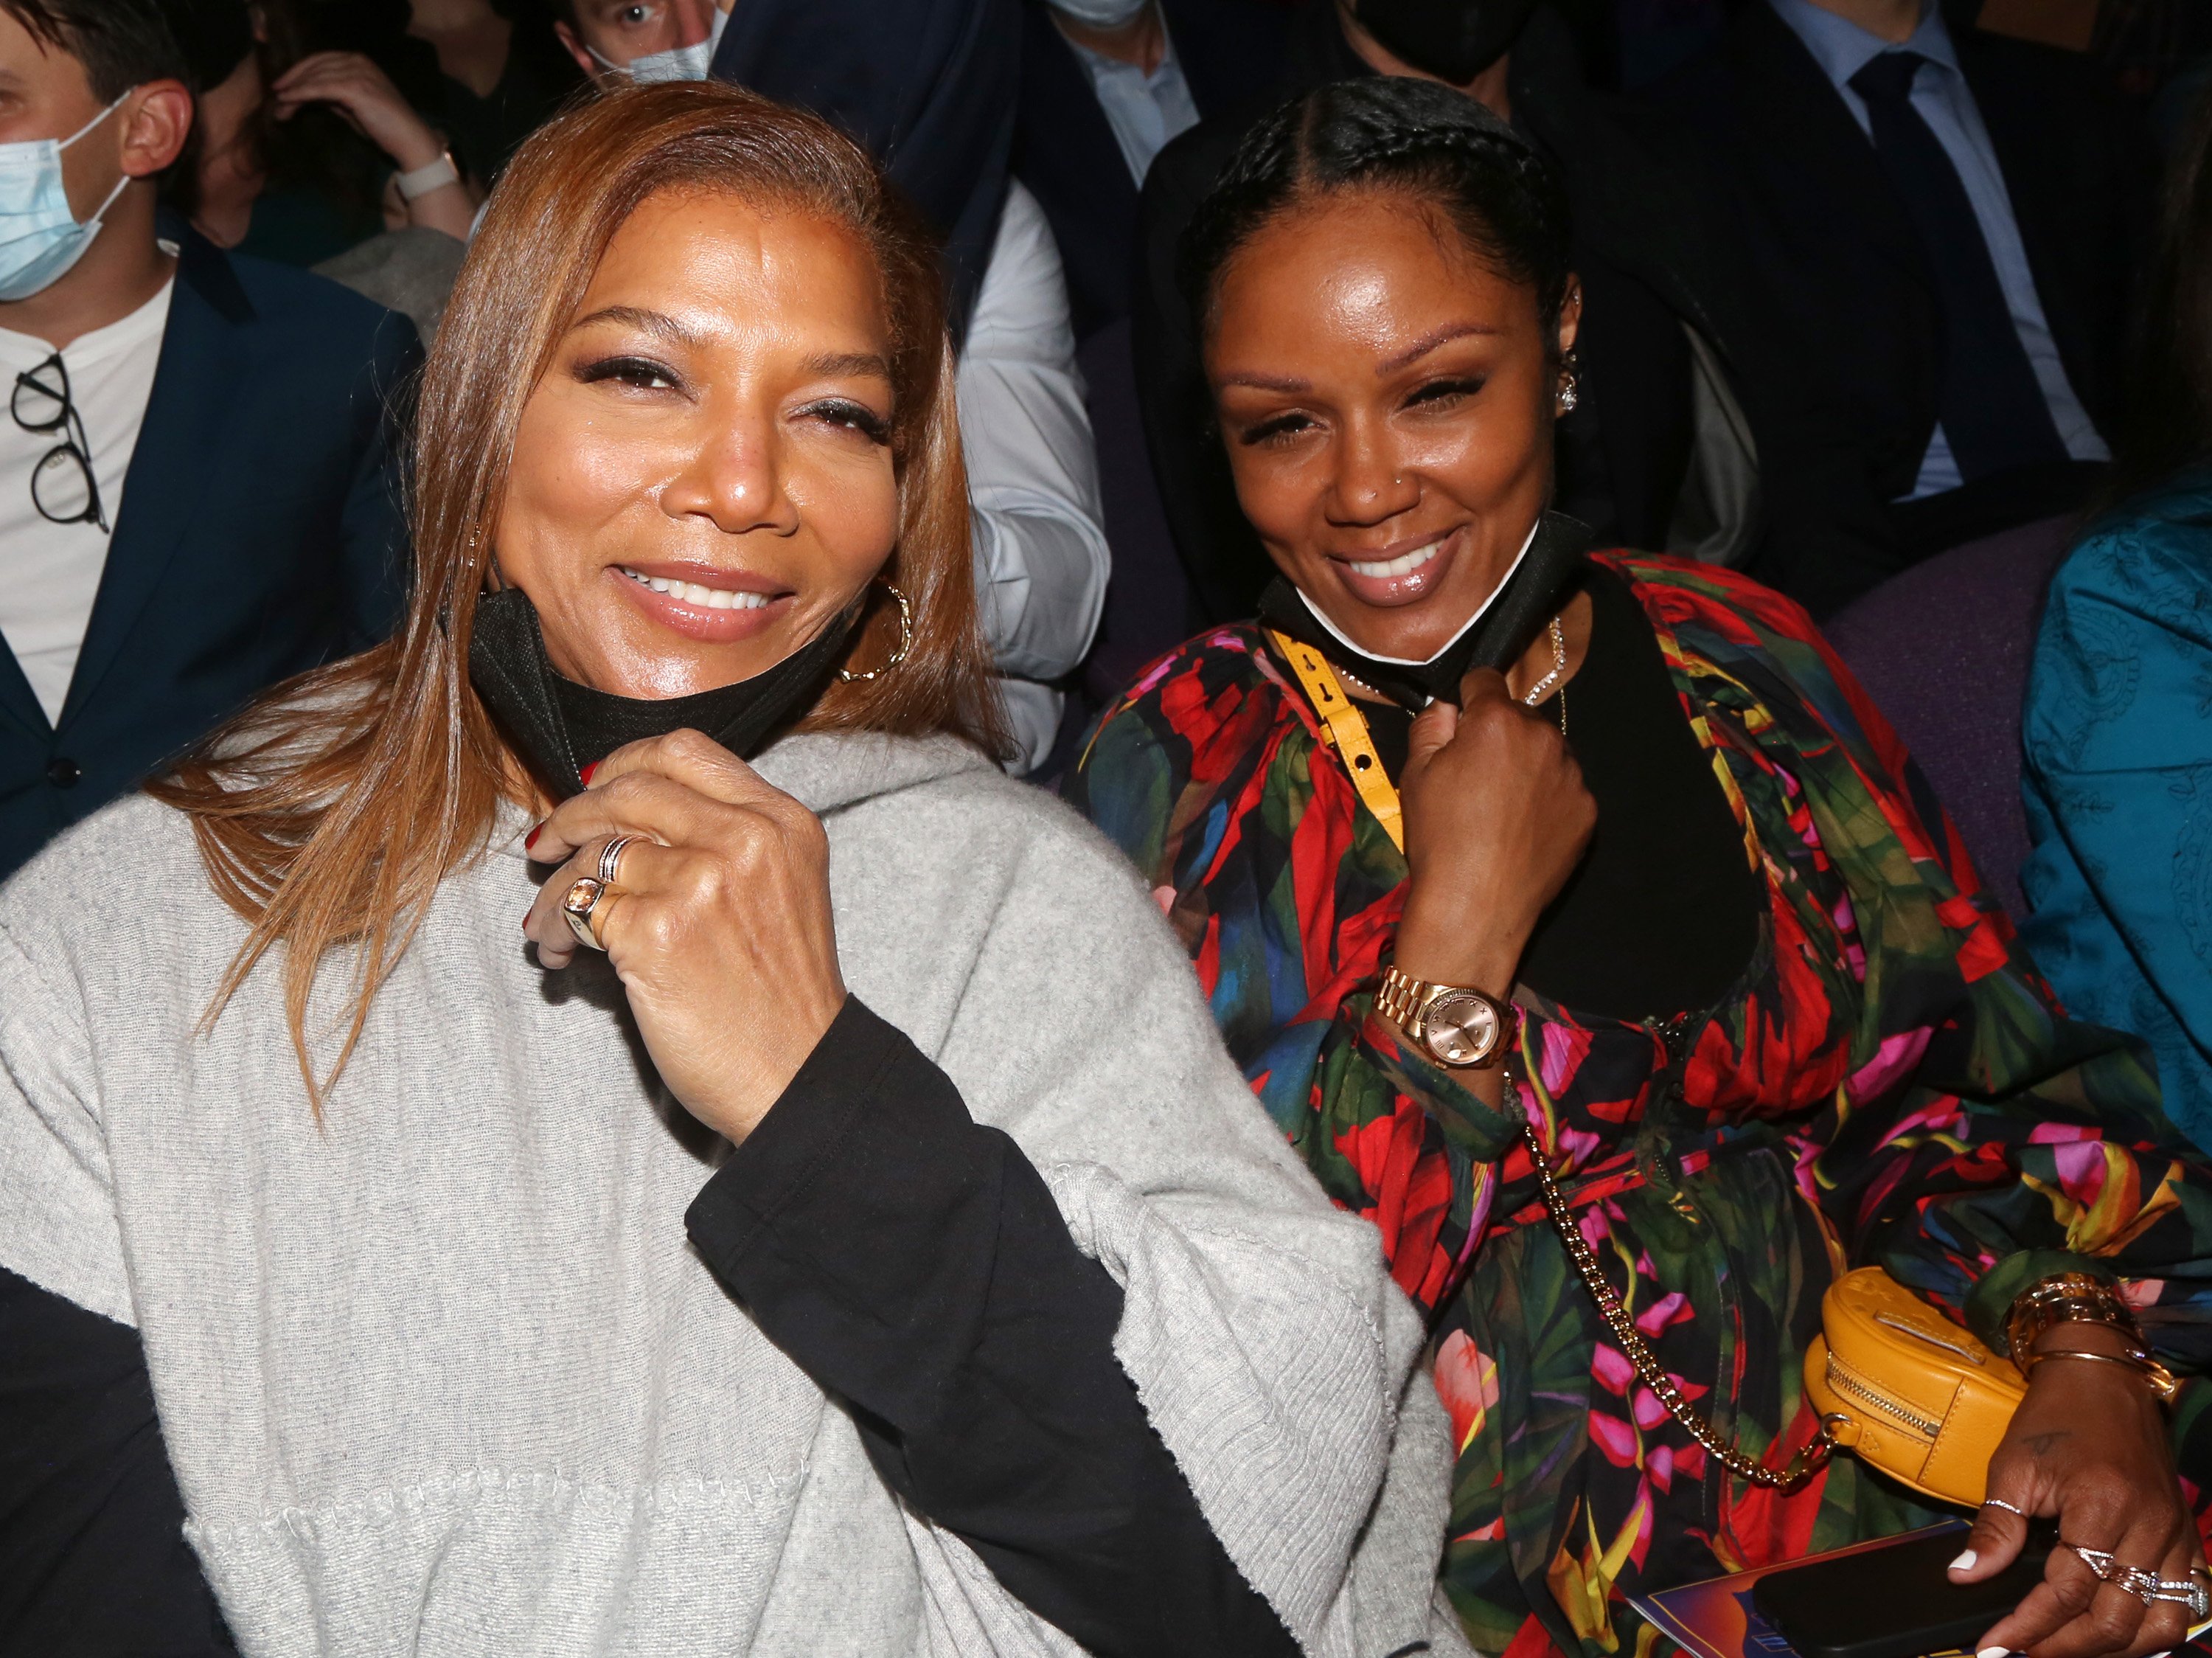 Eboni Nichols and Queen Latifah at the opening night of "Strange Loop" in New York on April 26, 2022 | Source: Getty Images 